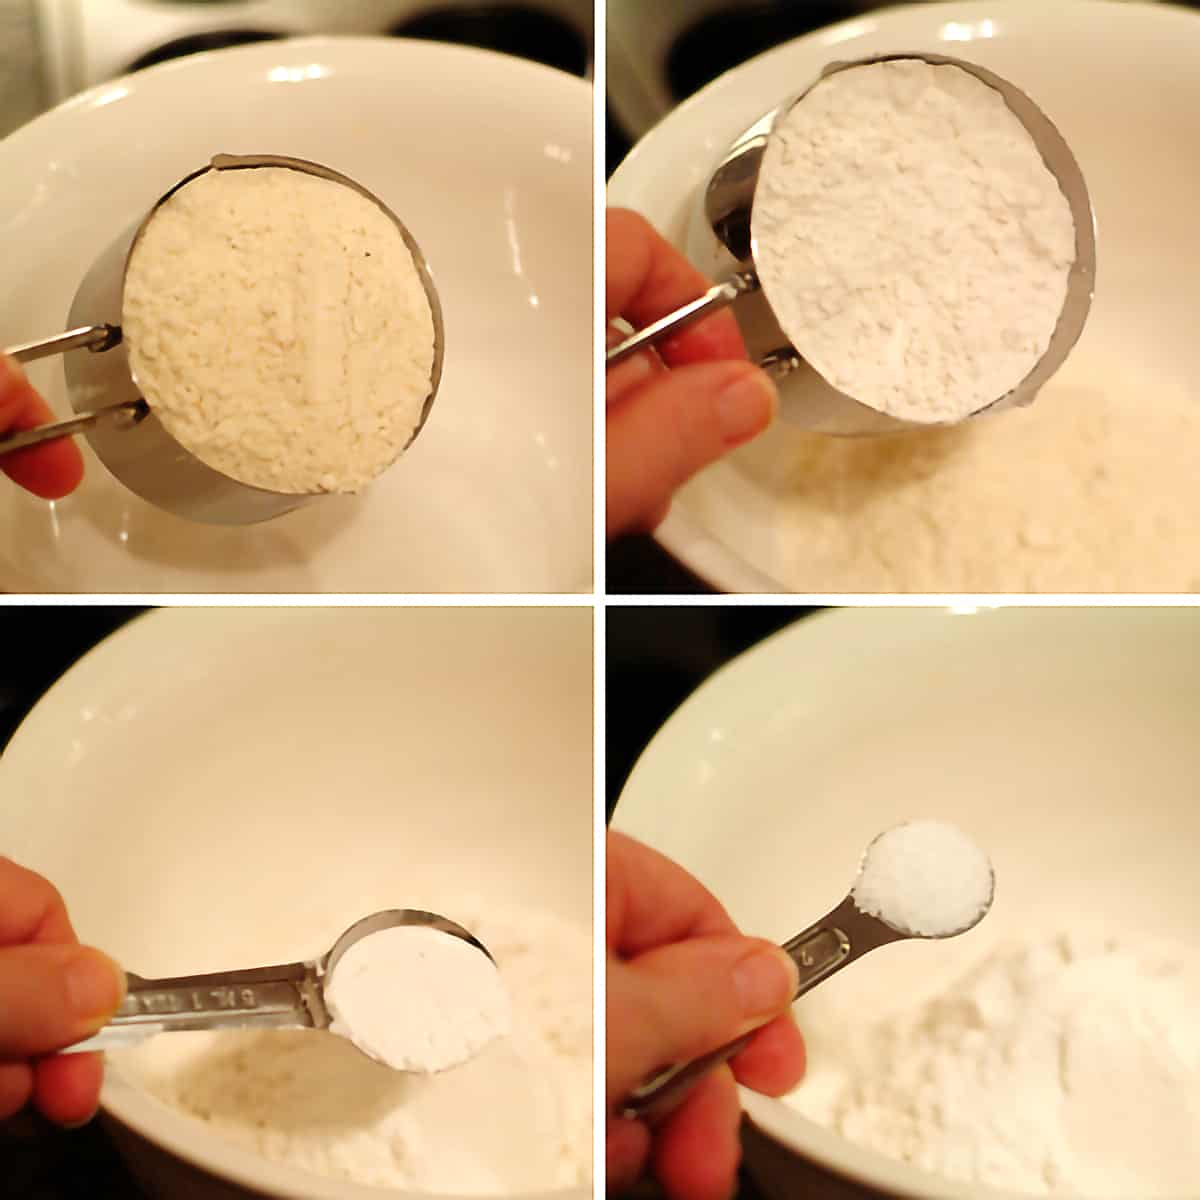 Collage showing individual dry ingredients being measured into a mixing bowl.